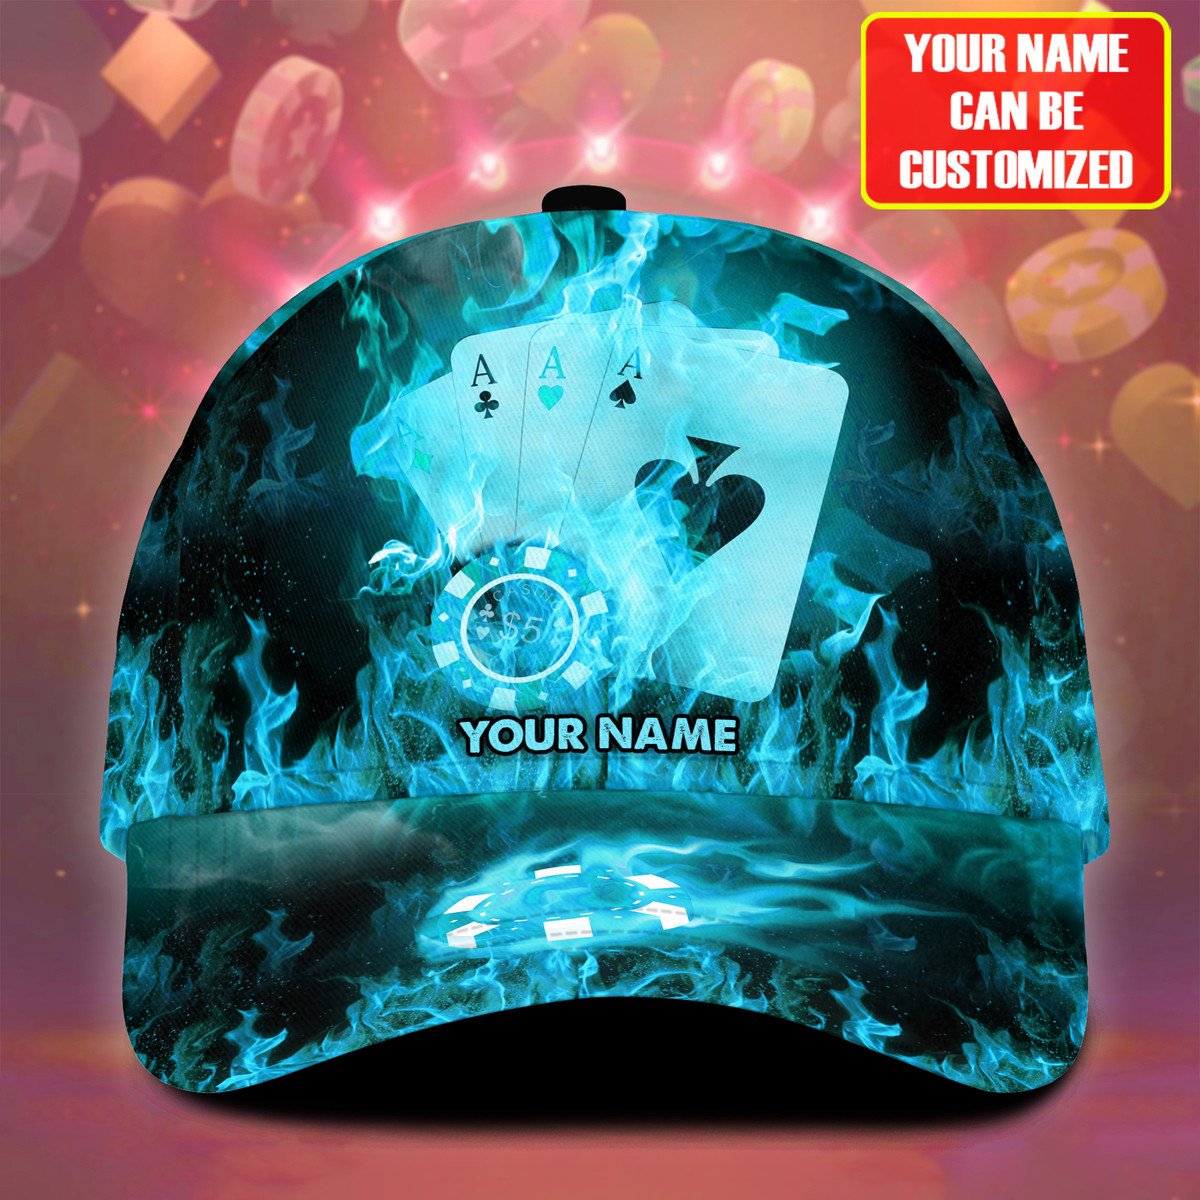 Personalized Name Multi Color Fire Poker Classic Cap/ Poker On Fire Hat for Men